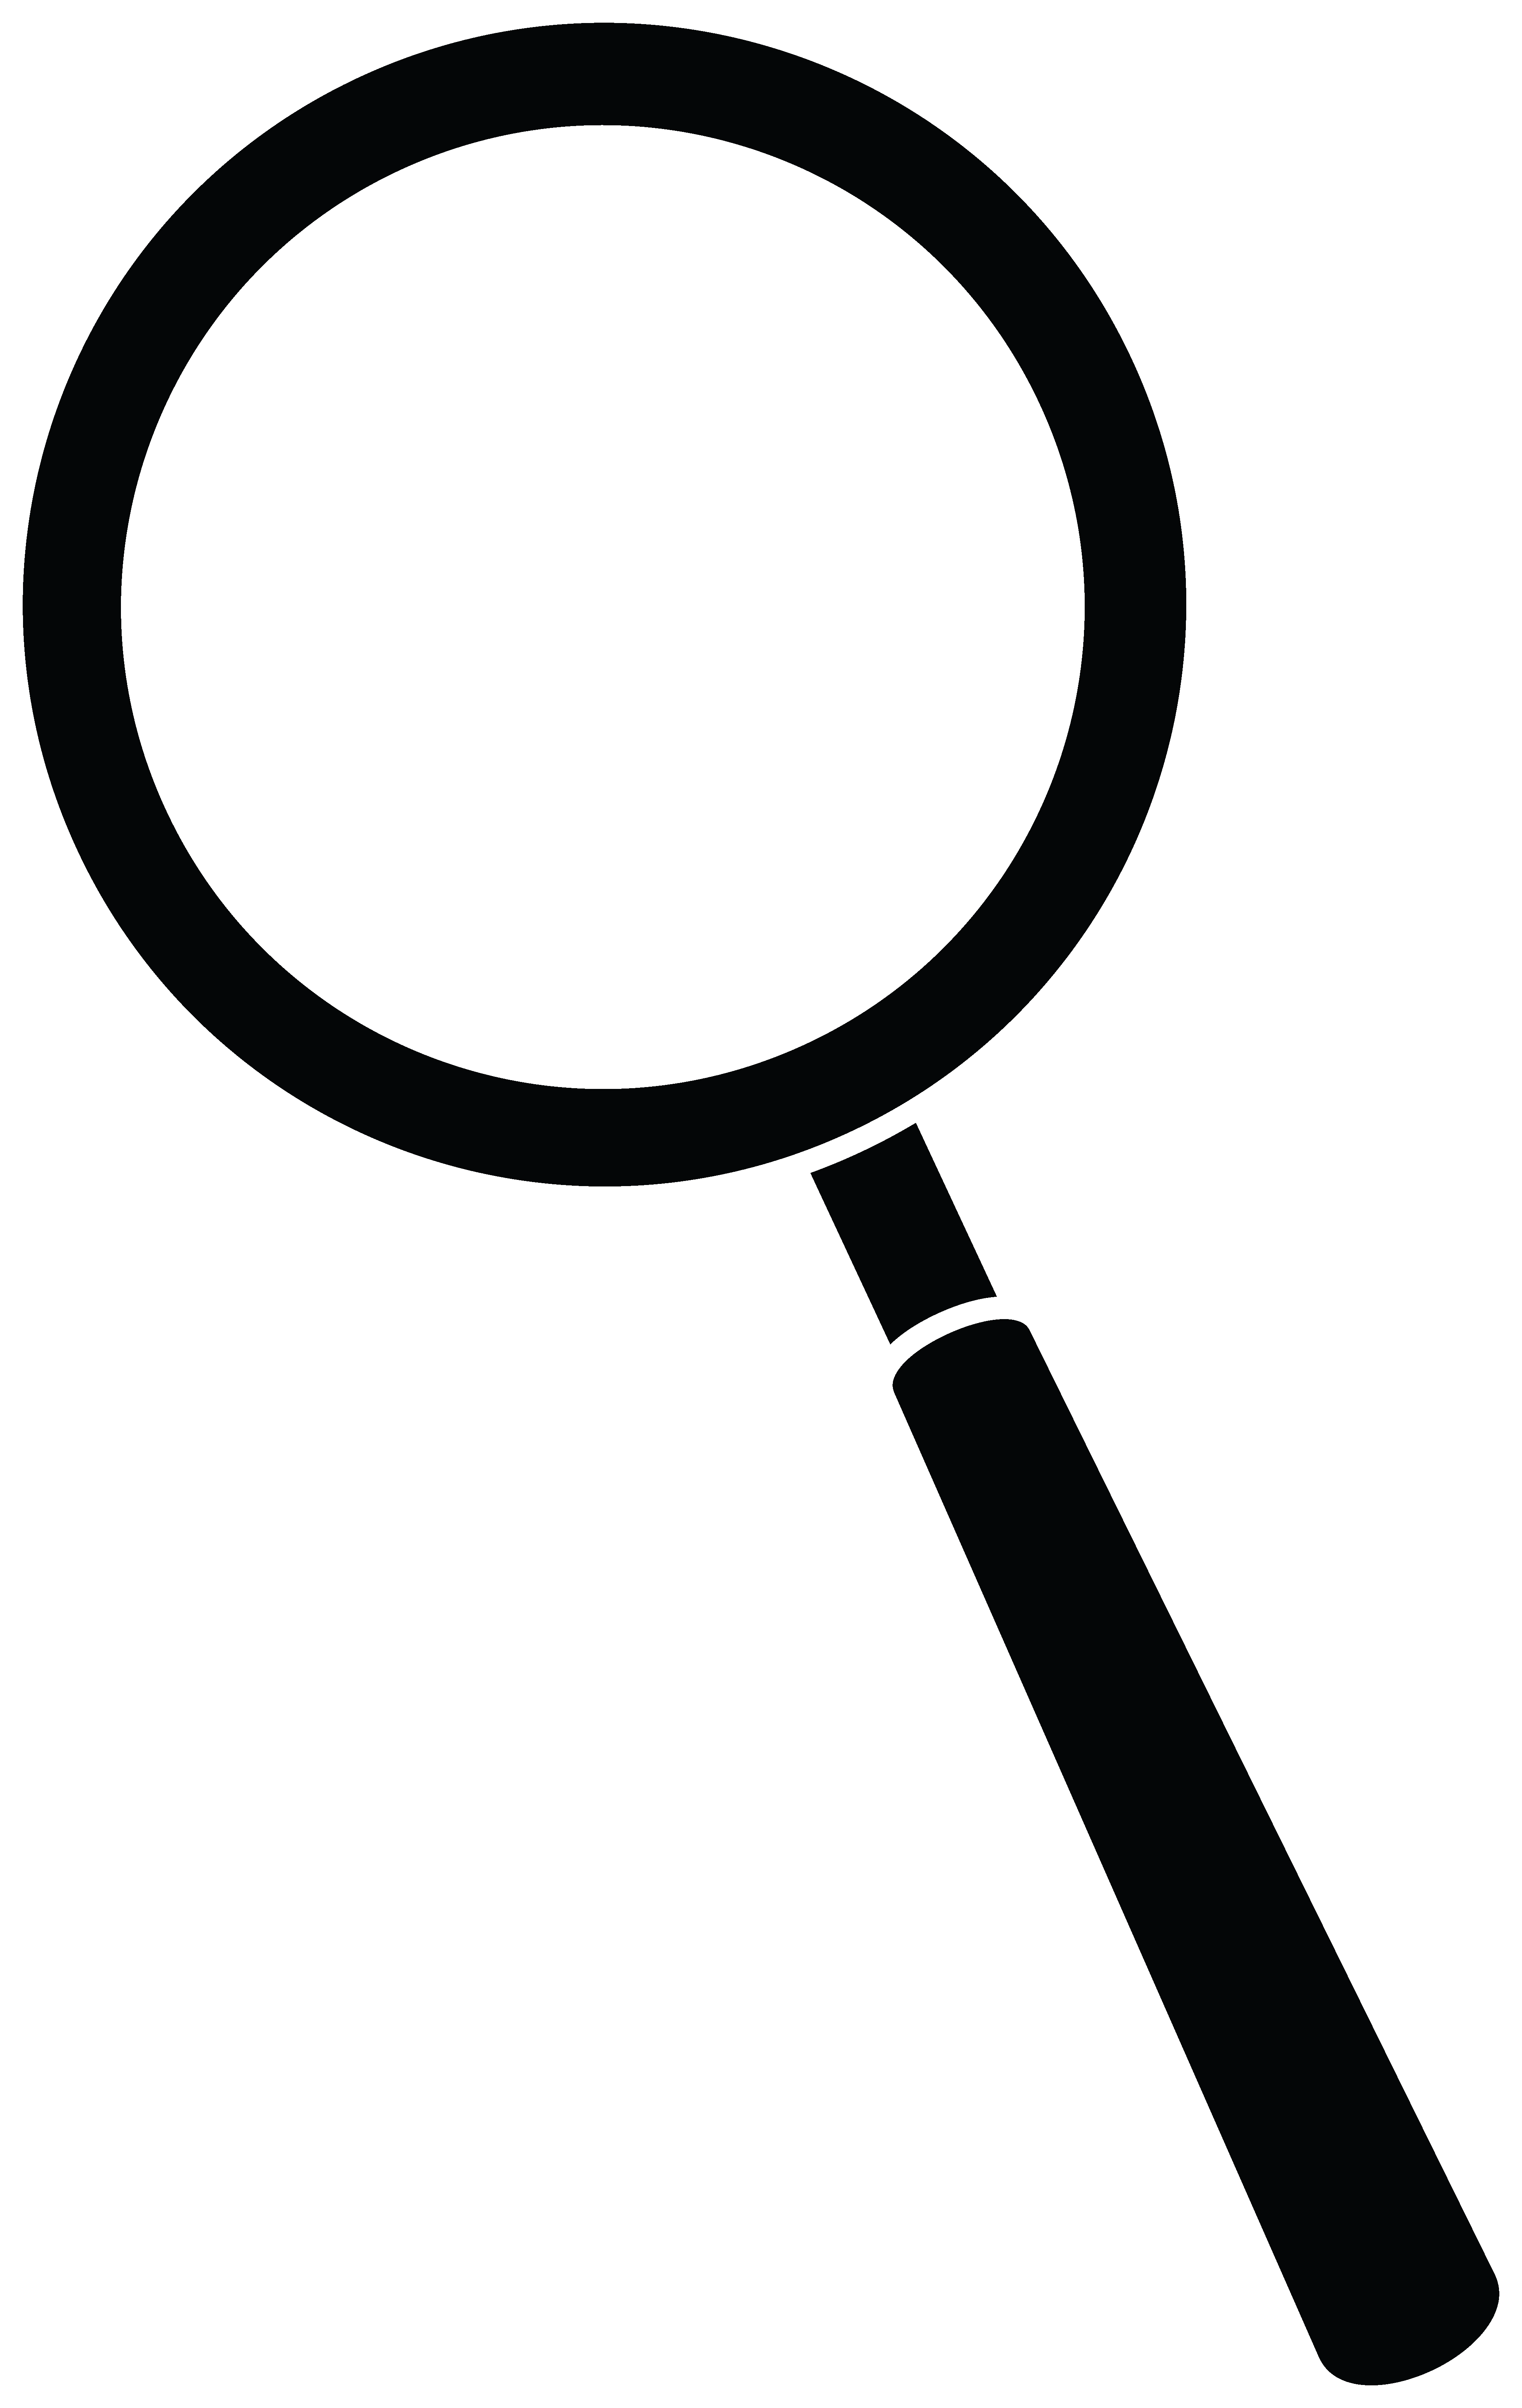 Sherlock holmes magnifying glass clipart